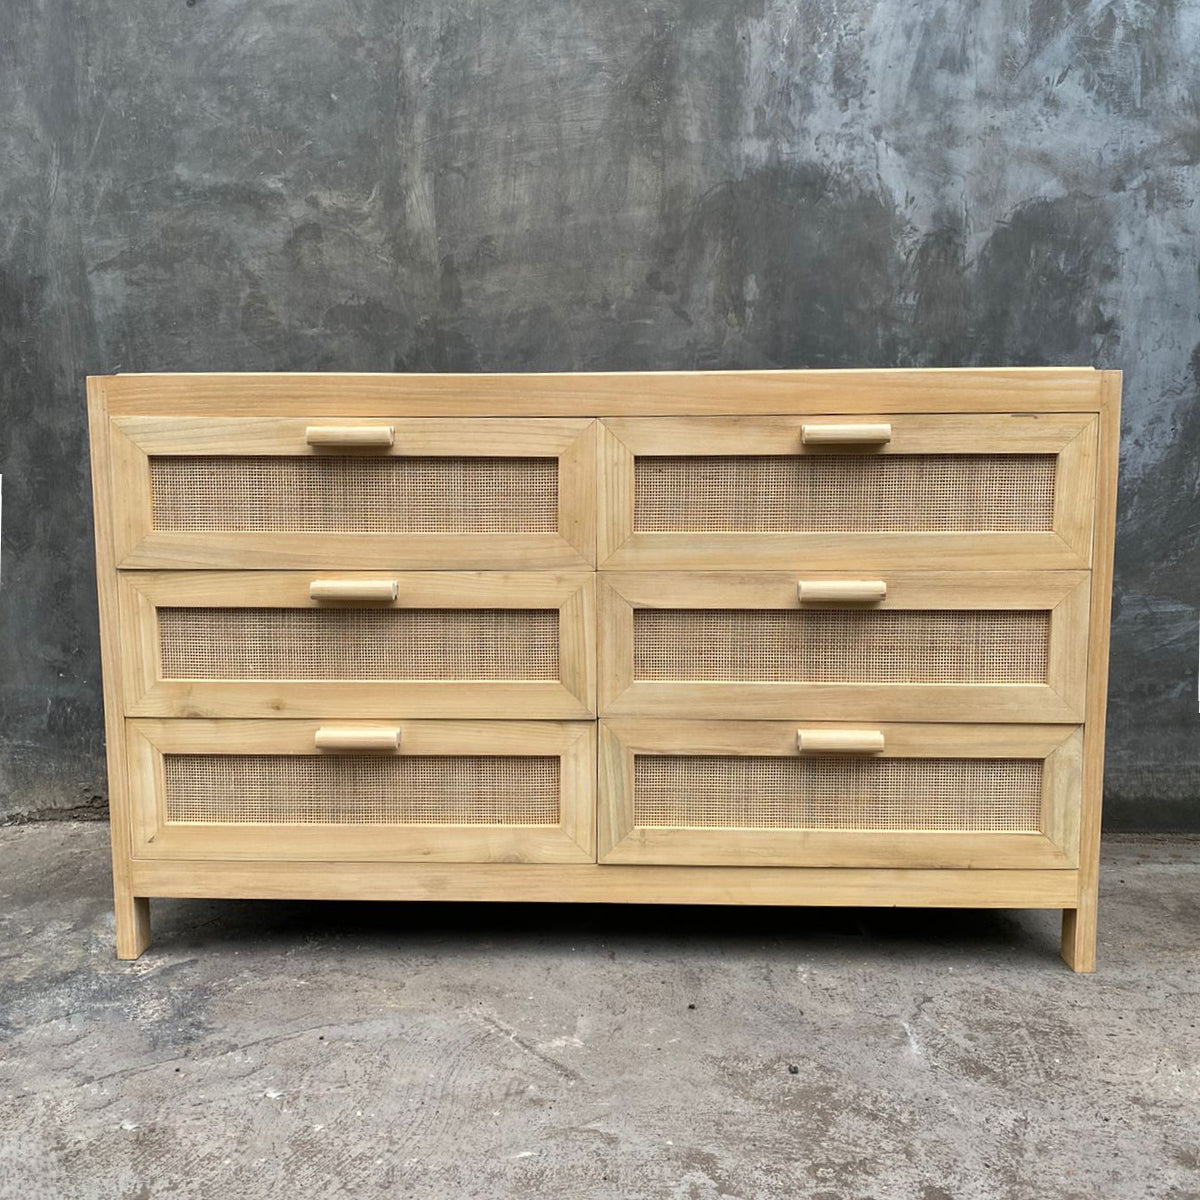 Casa Chest of 6 Timber Drawers